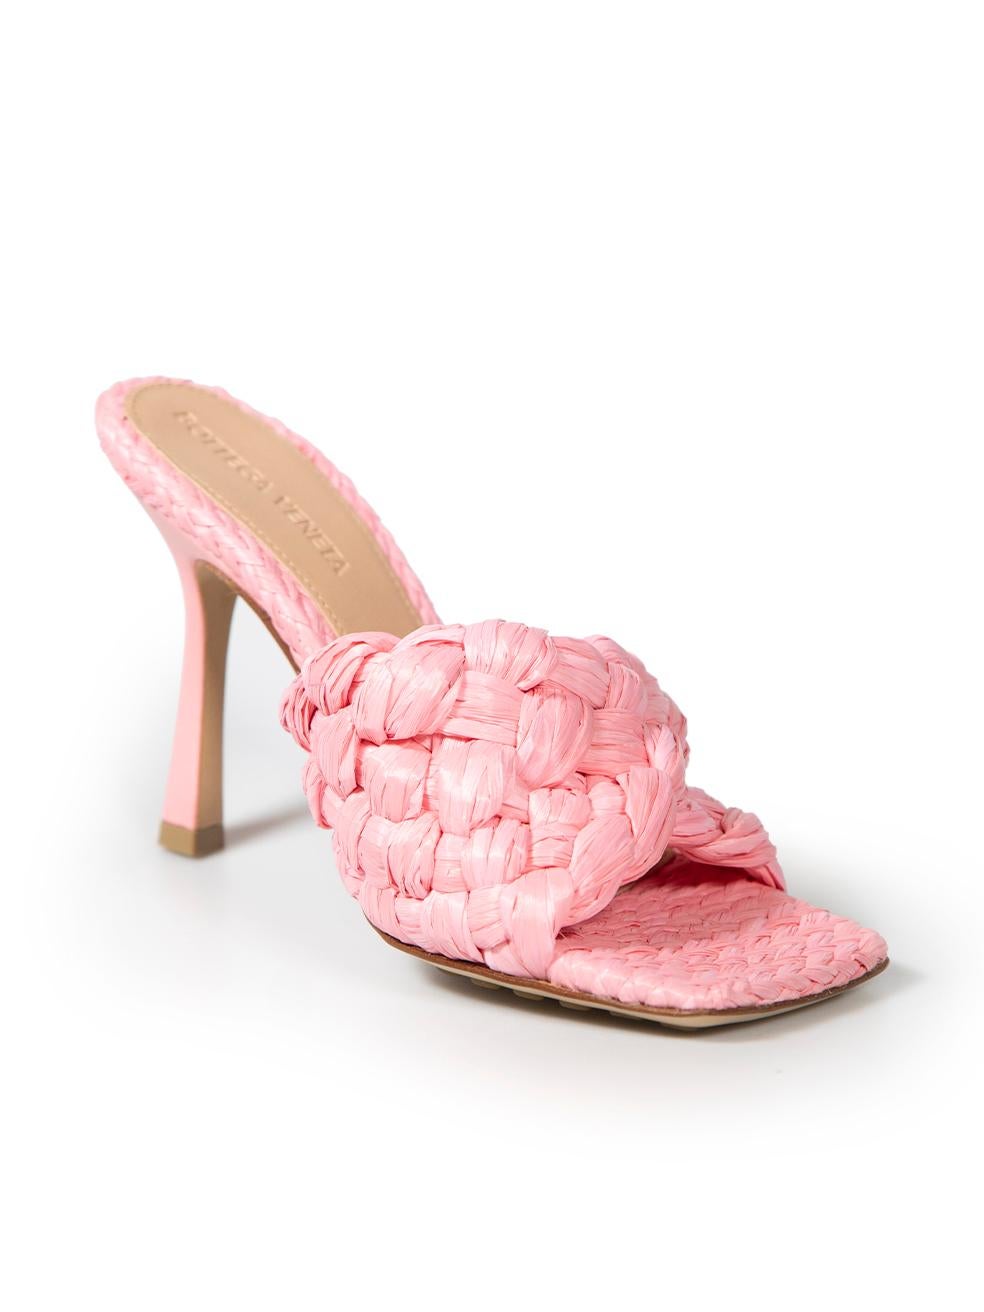 CONDITION is Never worn, with tags. No visible wear to shoes is evident on this new Bottega Veneta designer resale item. These shoes come with original box and dust bags.
 
 
 
 Details
 
 
 Stretch model
 
 Pink
 
 Raffia
 
 Heeled sandals
 
